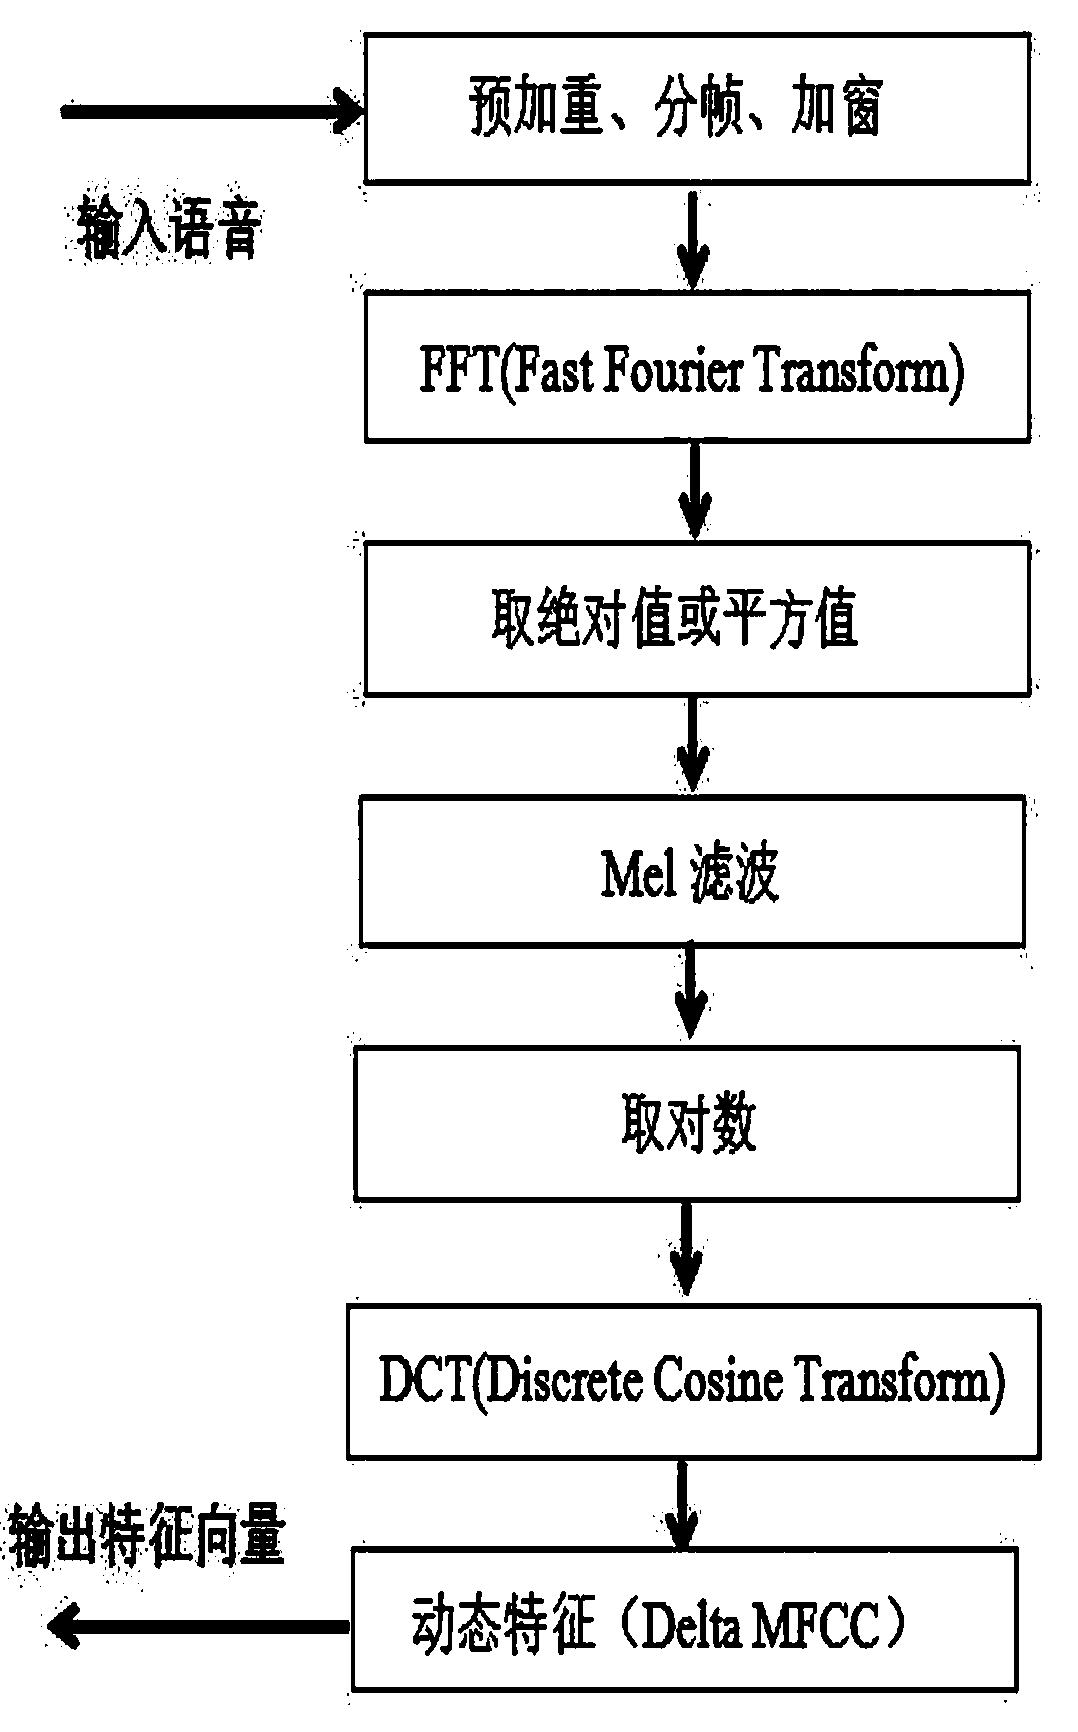 Speaker recognition method based on dictionary learning and low rank matrix decomposition